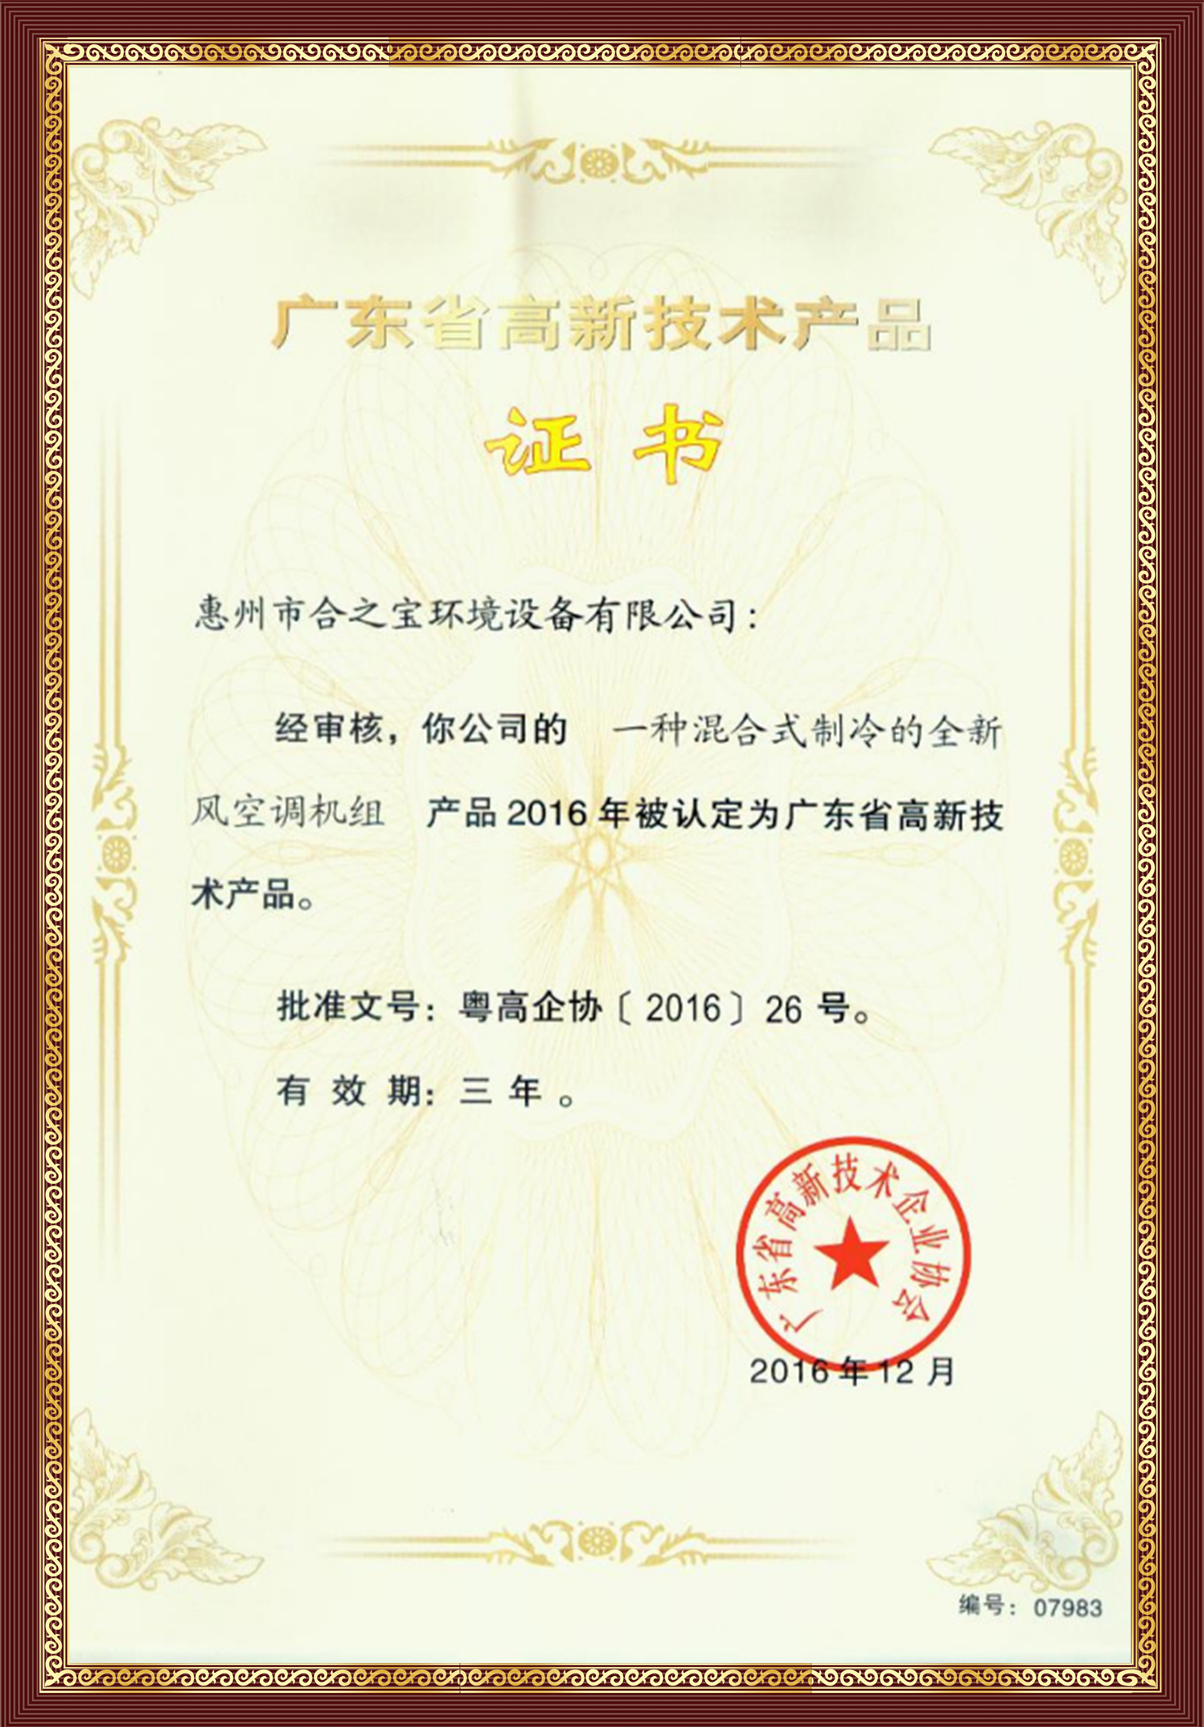 3、Certificate of Provincial High - tech Products of Guangdong